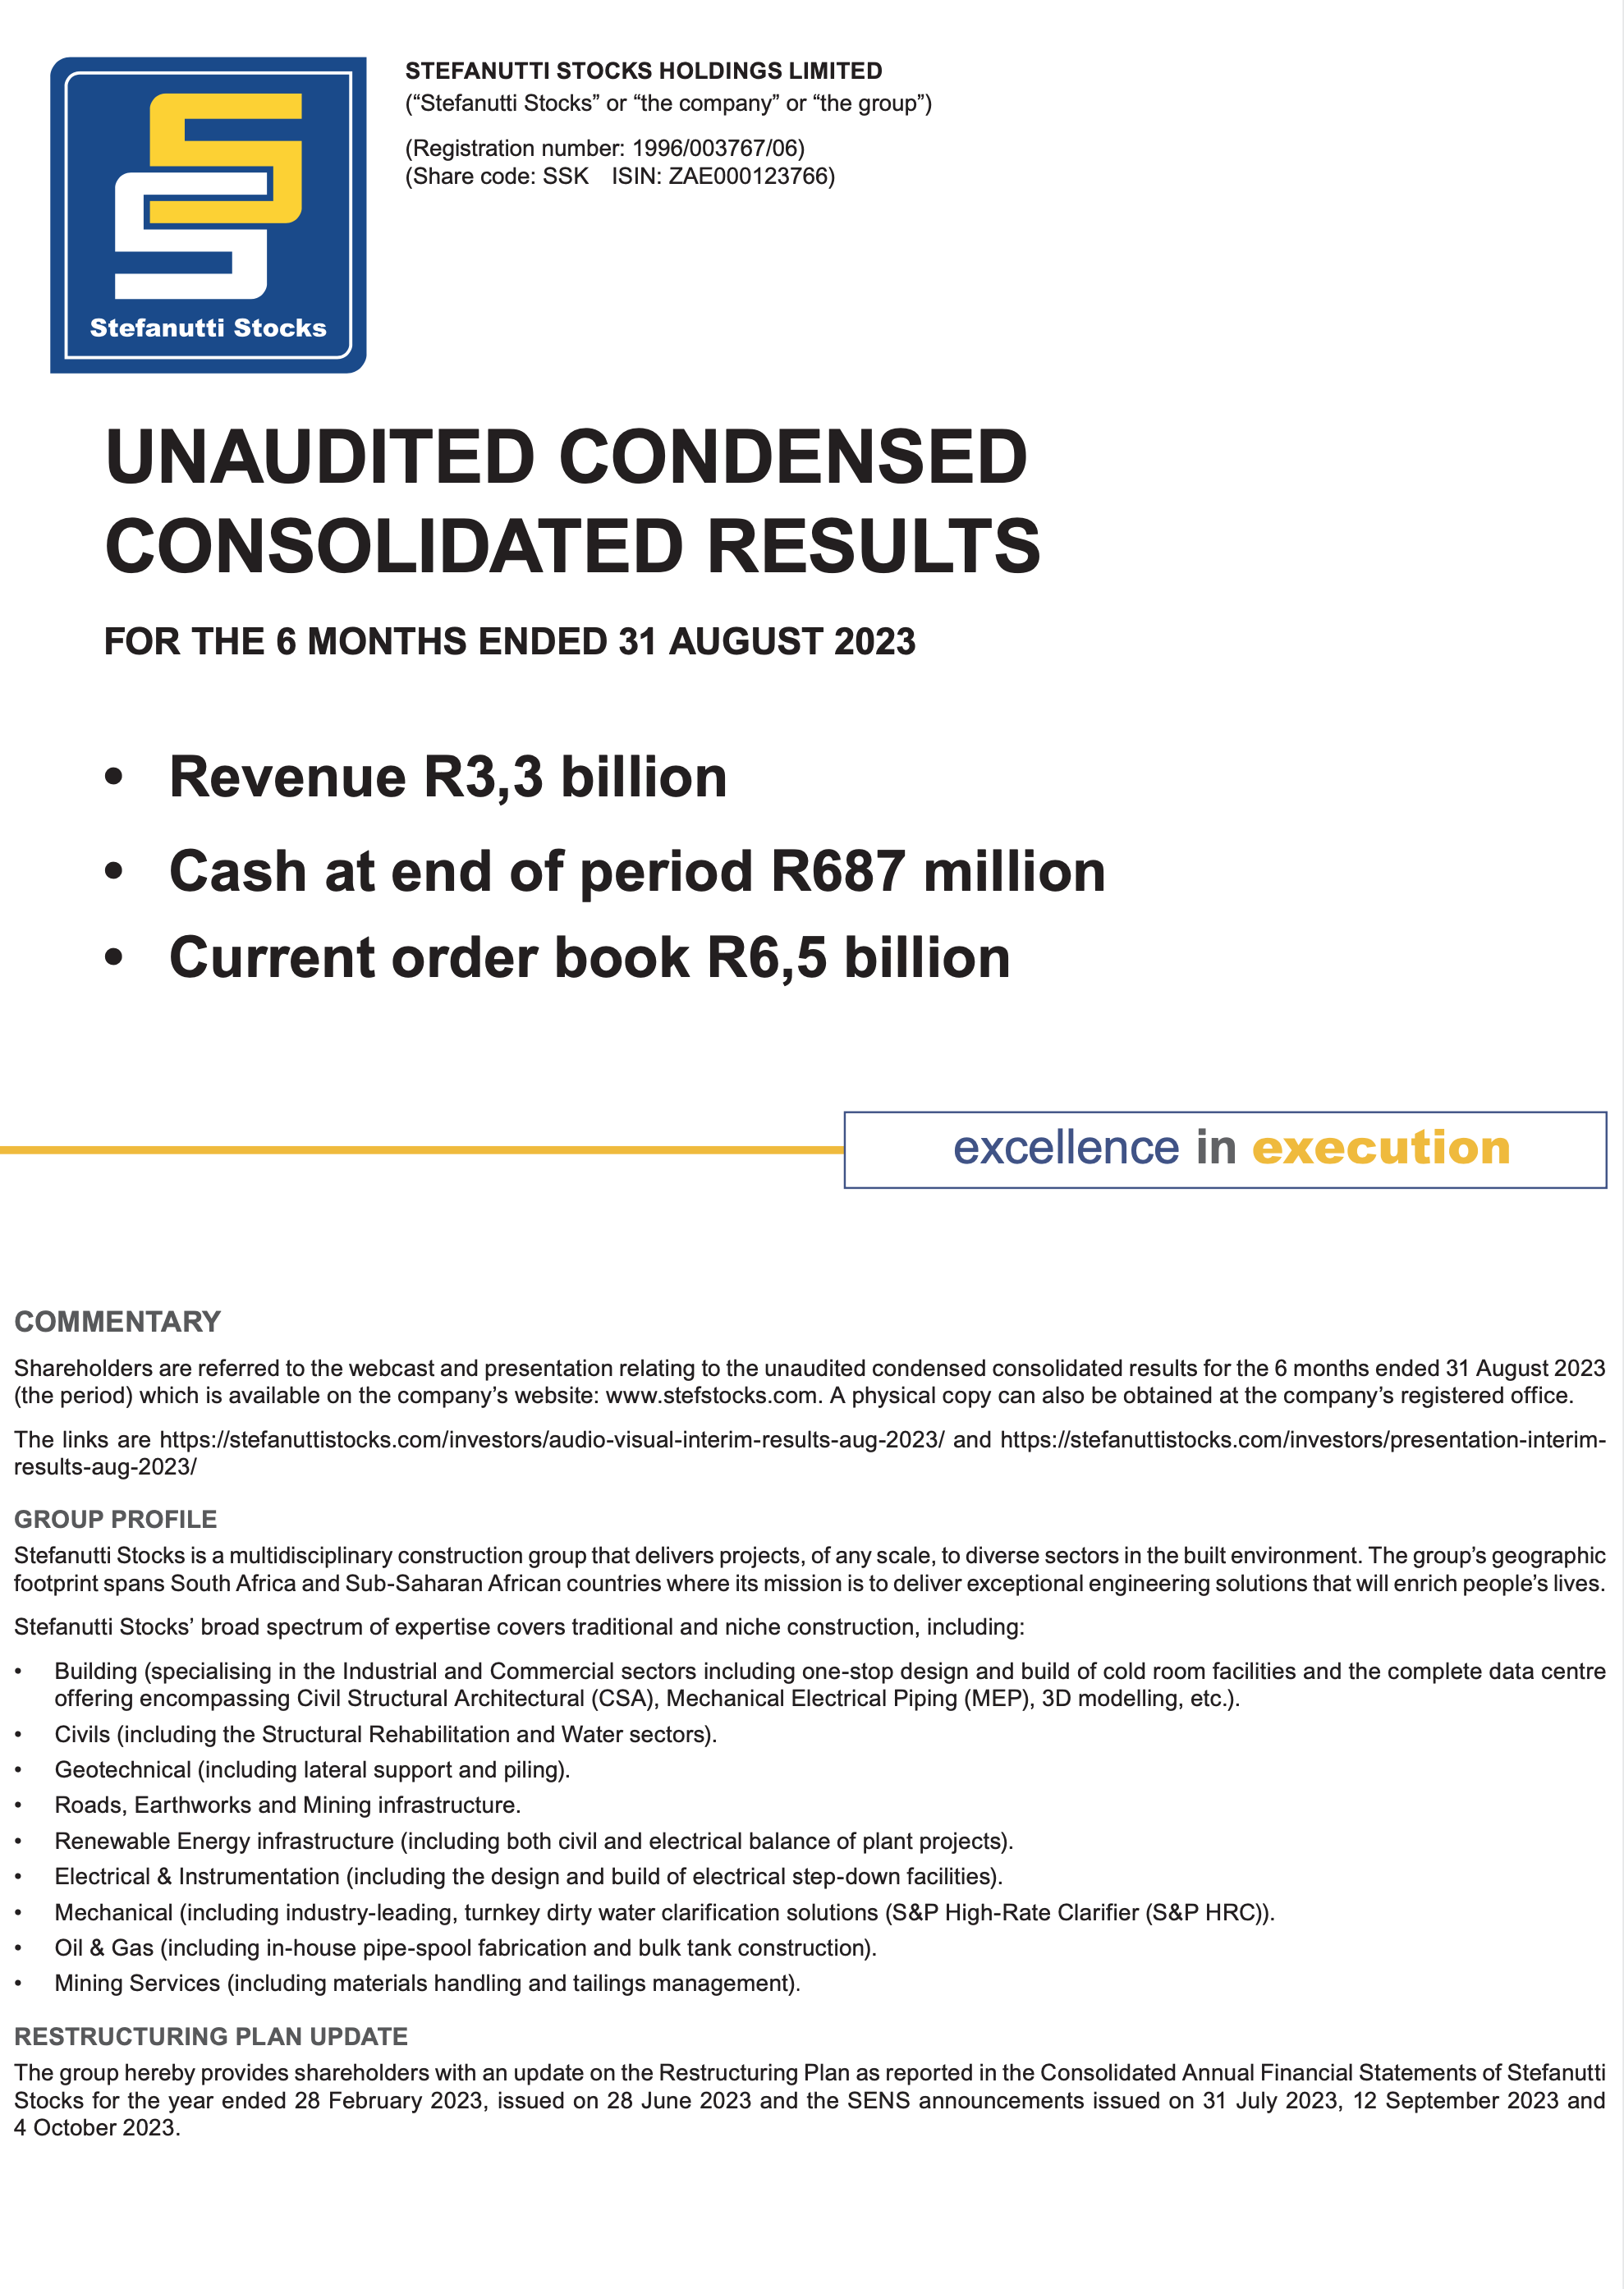 Unaudited Condensed Consolidated Results – Aug 2023